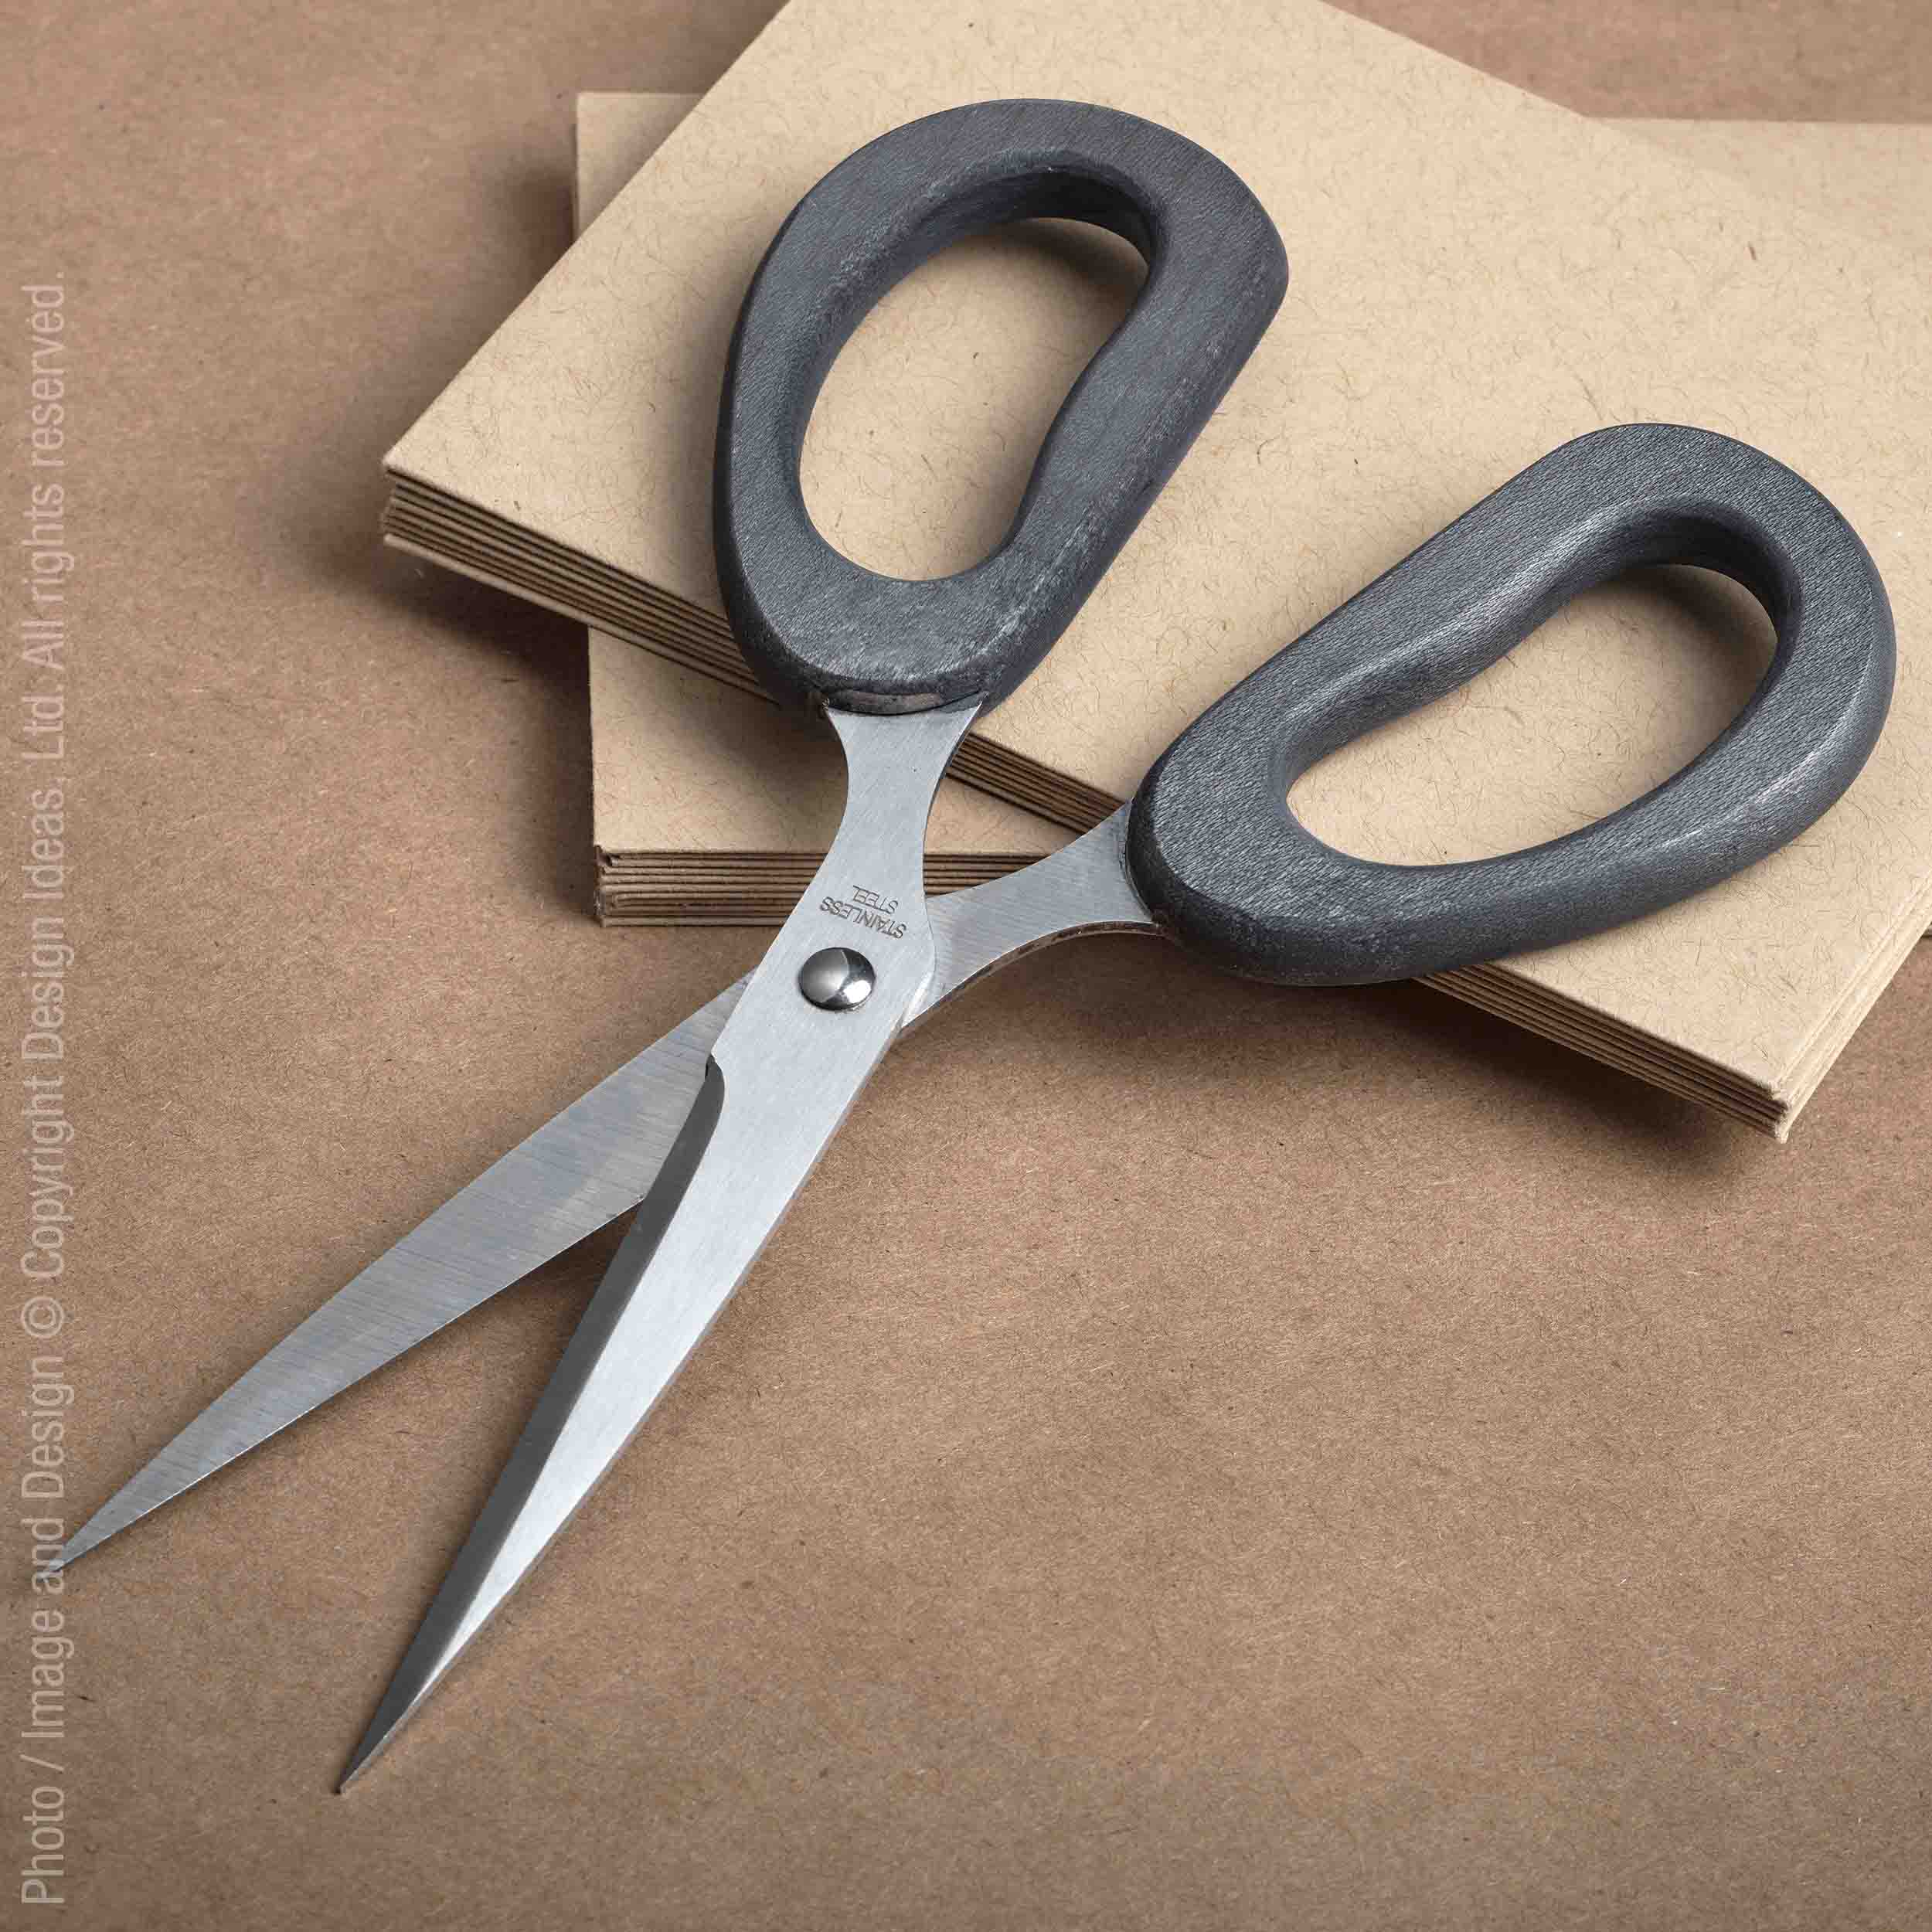 Cokala™ scissors - Black | Image 1 | Premium Desk Accessory from the Cokala collection | made with Sycamore for long lasting use | texxture